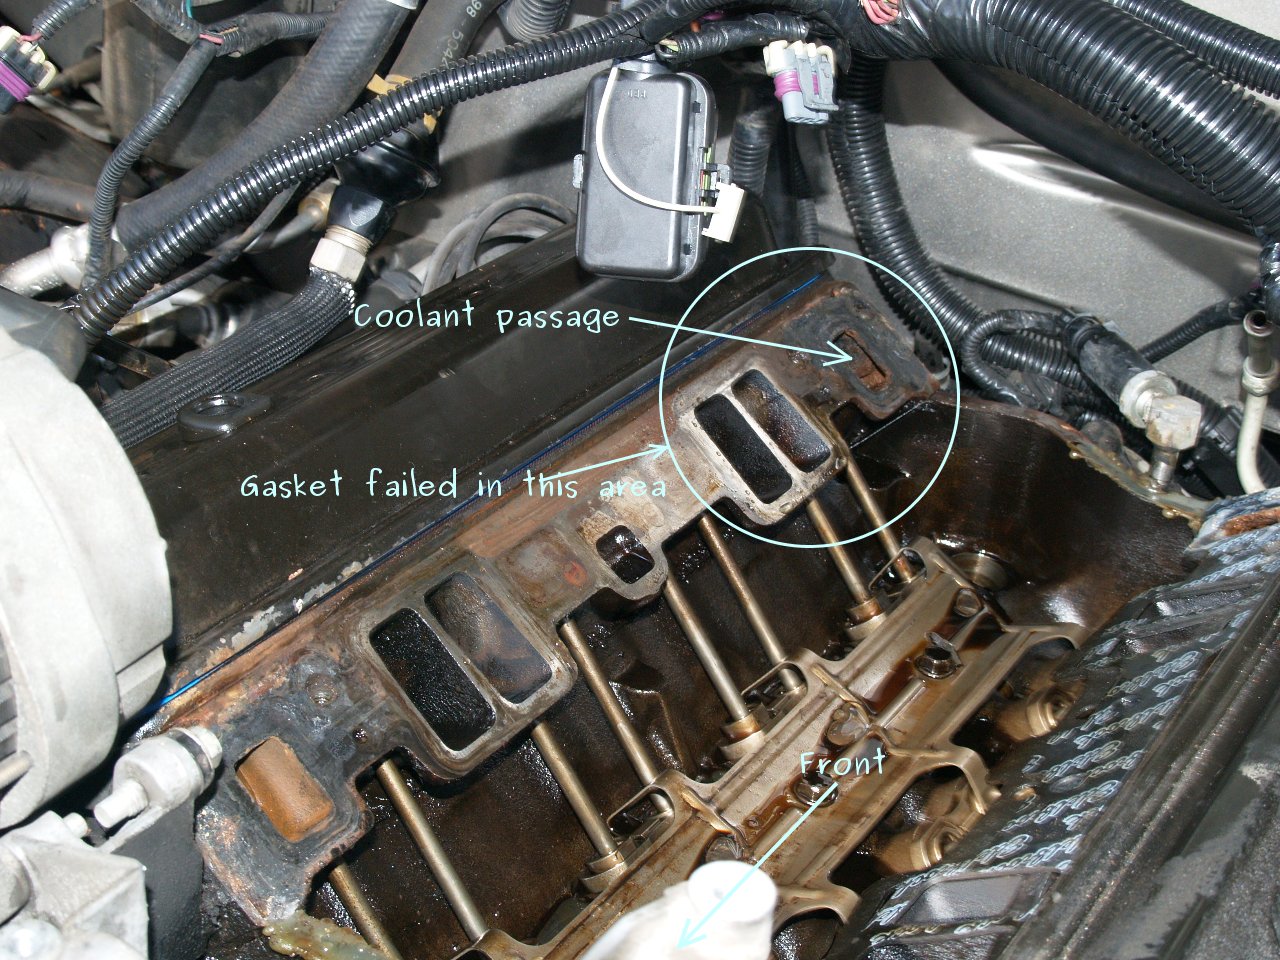 See P055B in engine